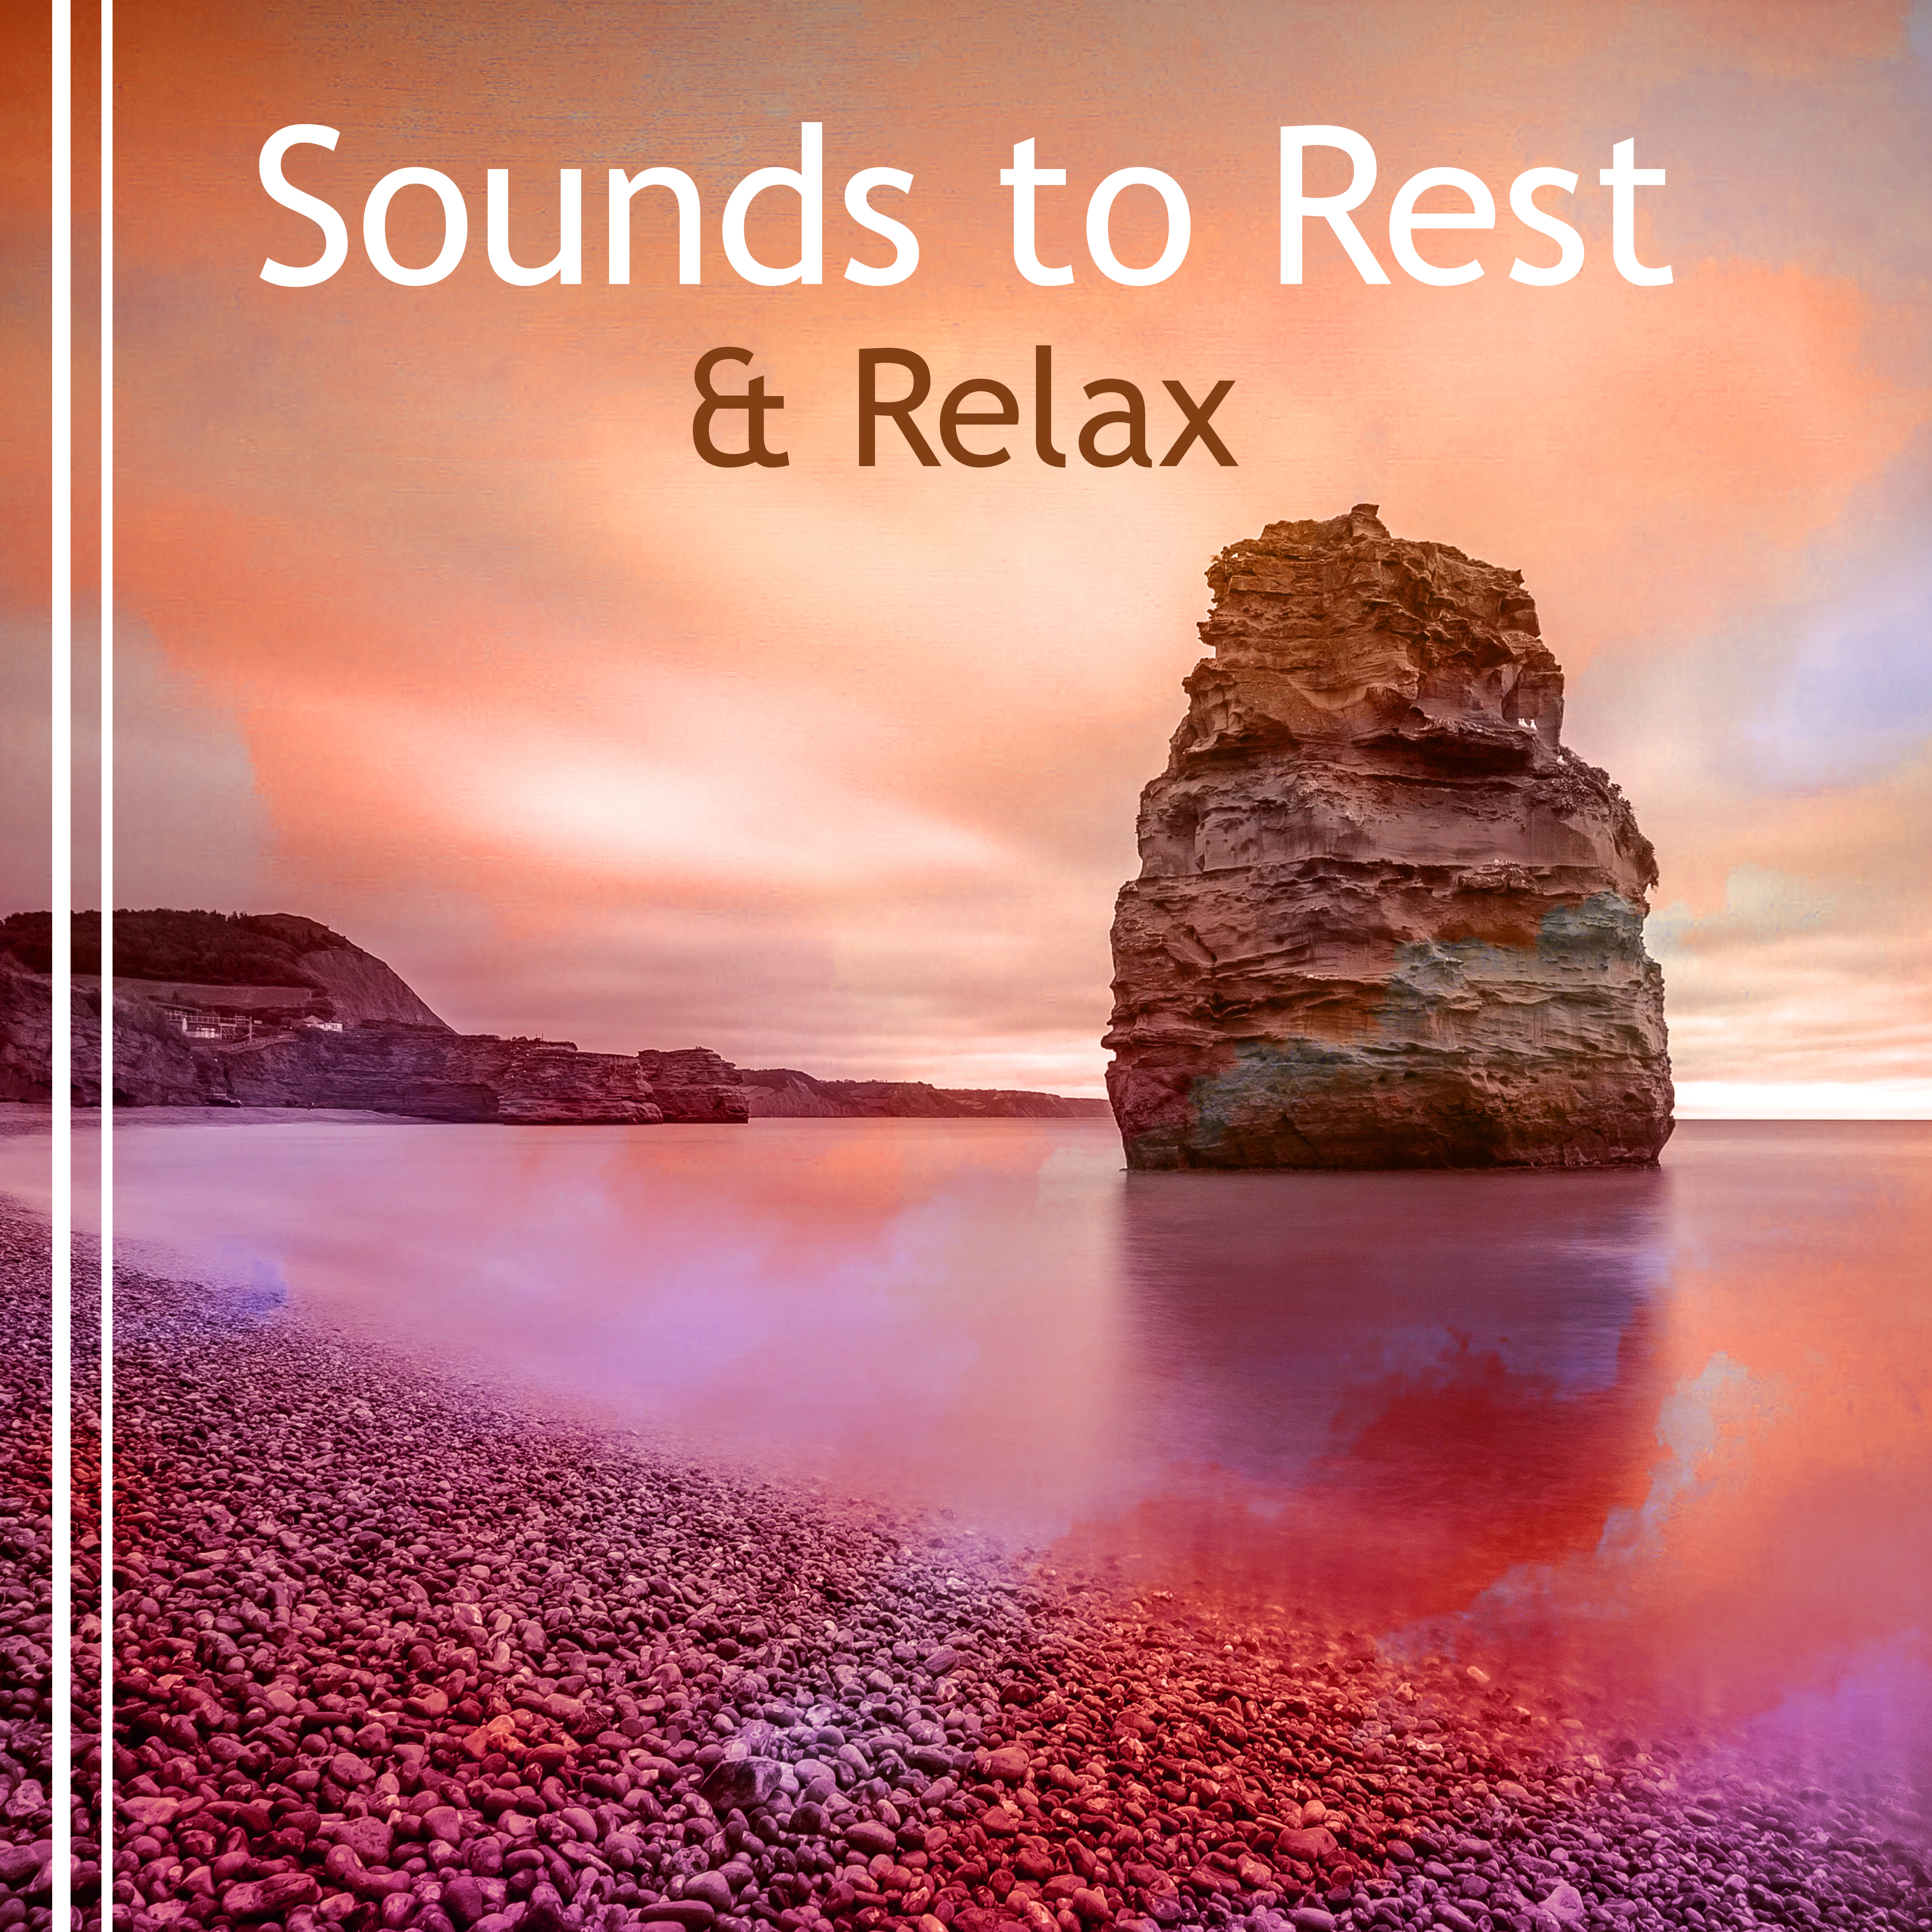 Sounds to Rest  Relax  New Age to Calm Down, Soothing Sounds to Relax, Peaceful Waves, Healing Therapy